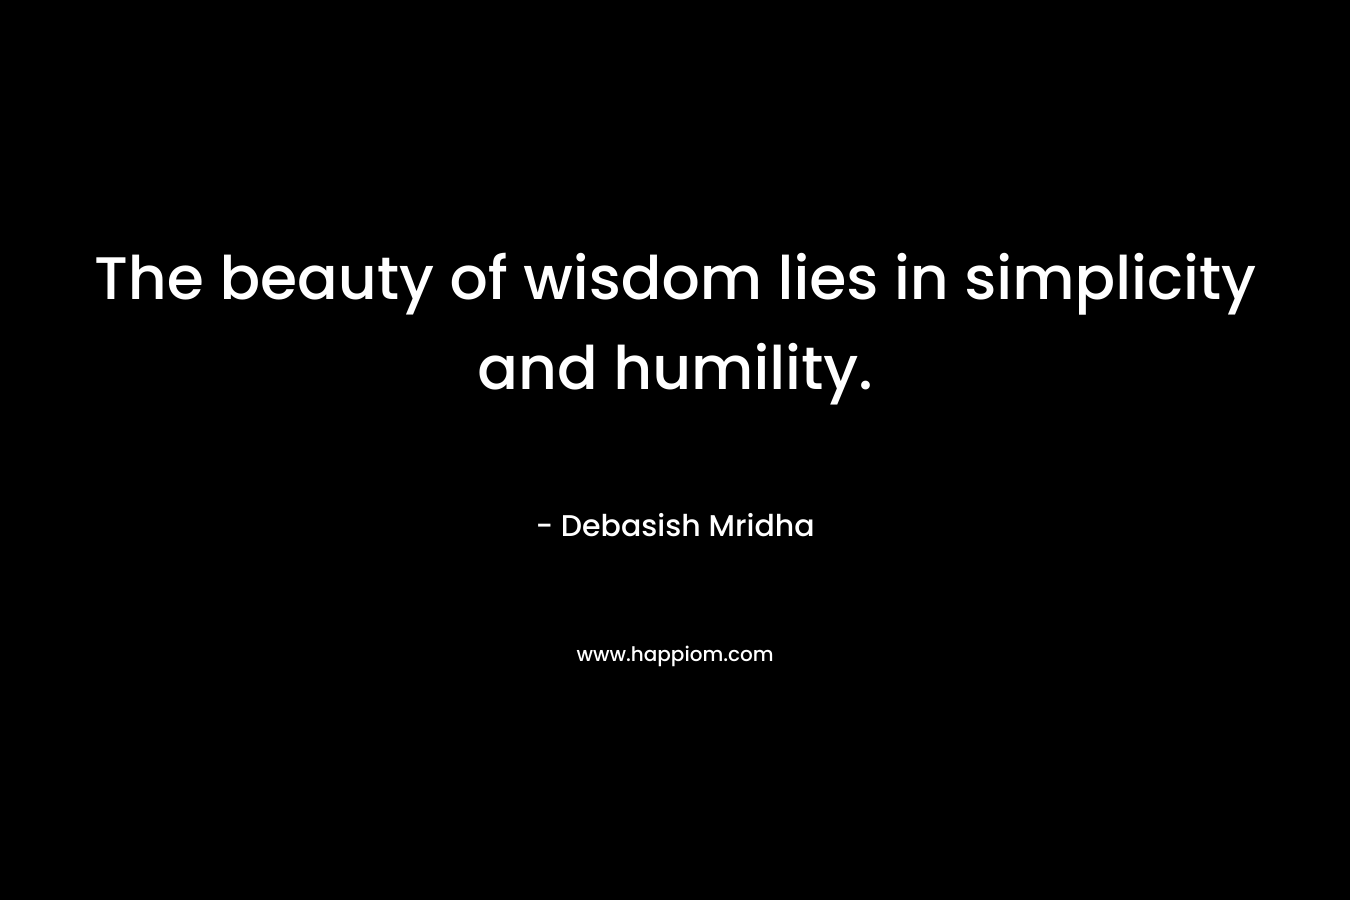 The beauty of wisdom lies in simplicity and humility.